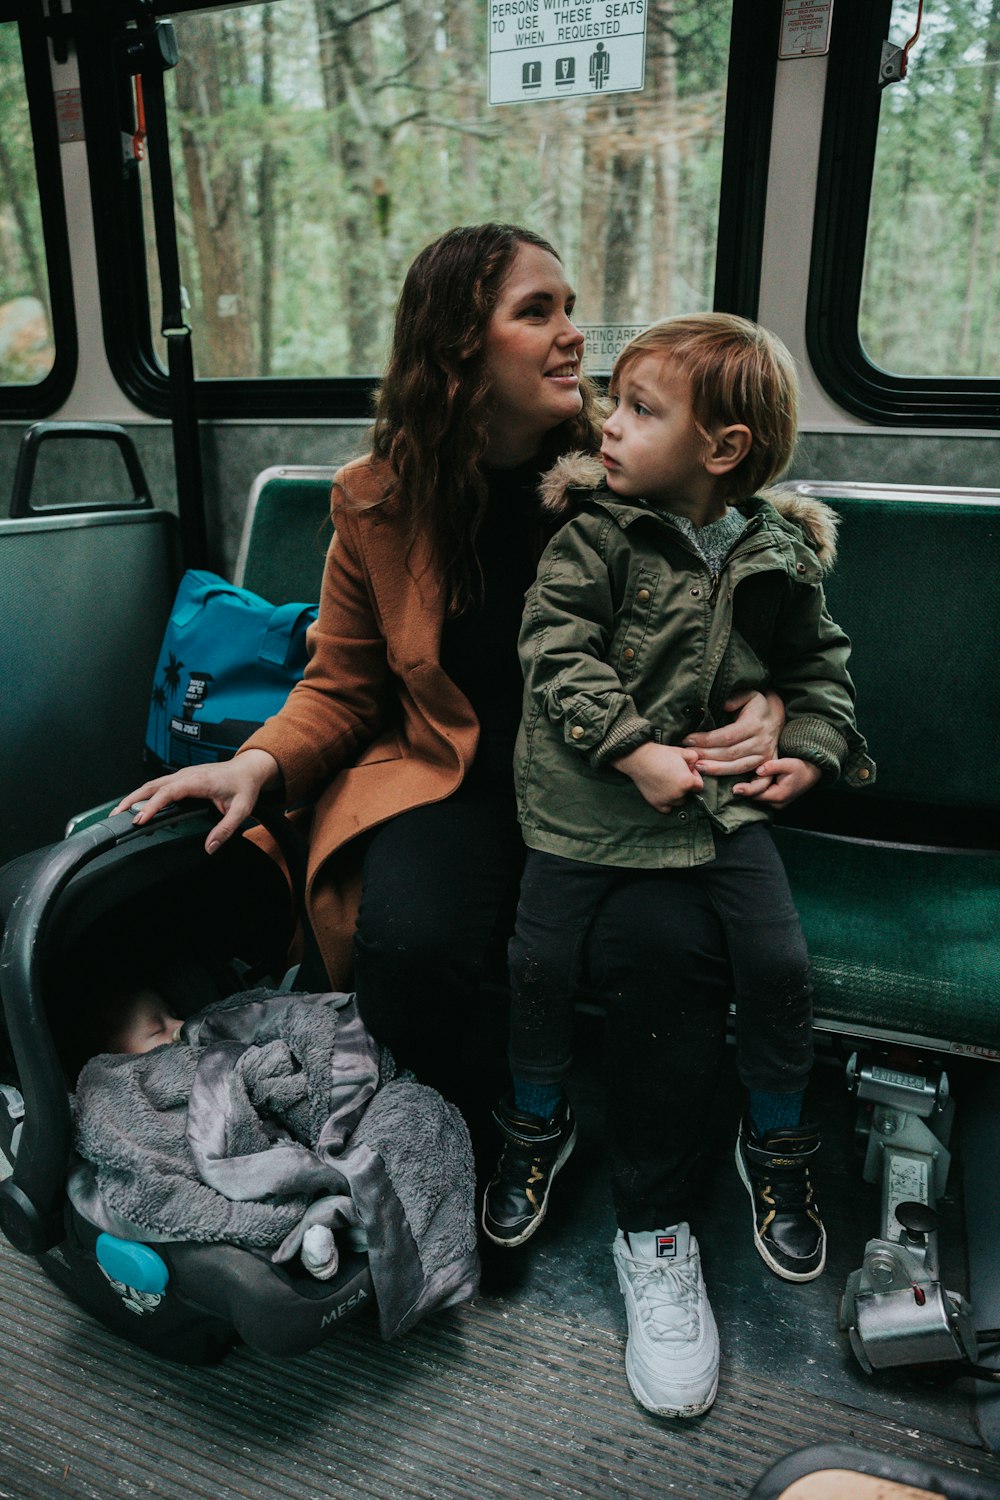 shallow focus photo of boy sitting on woman's lap